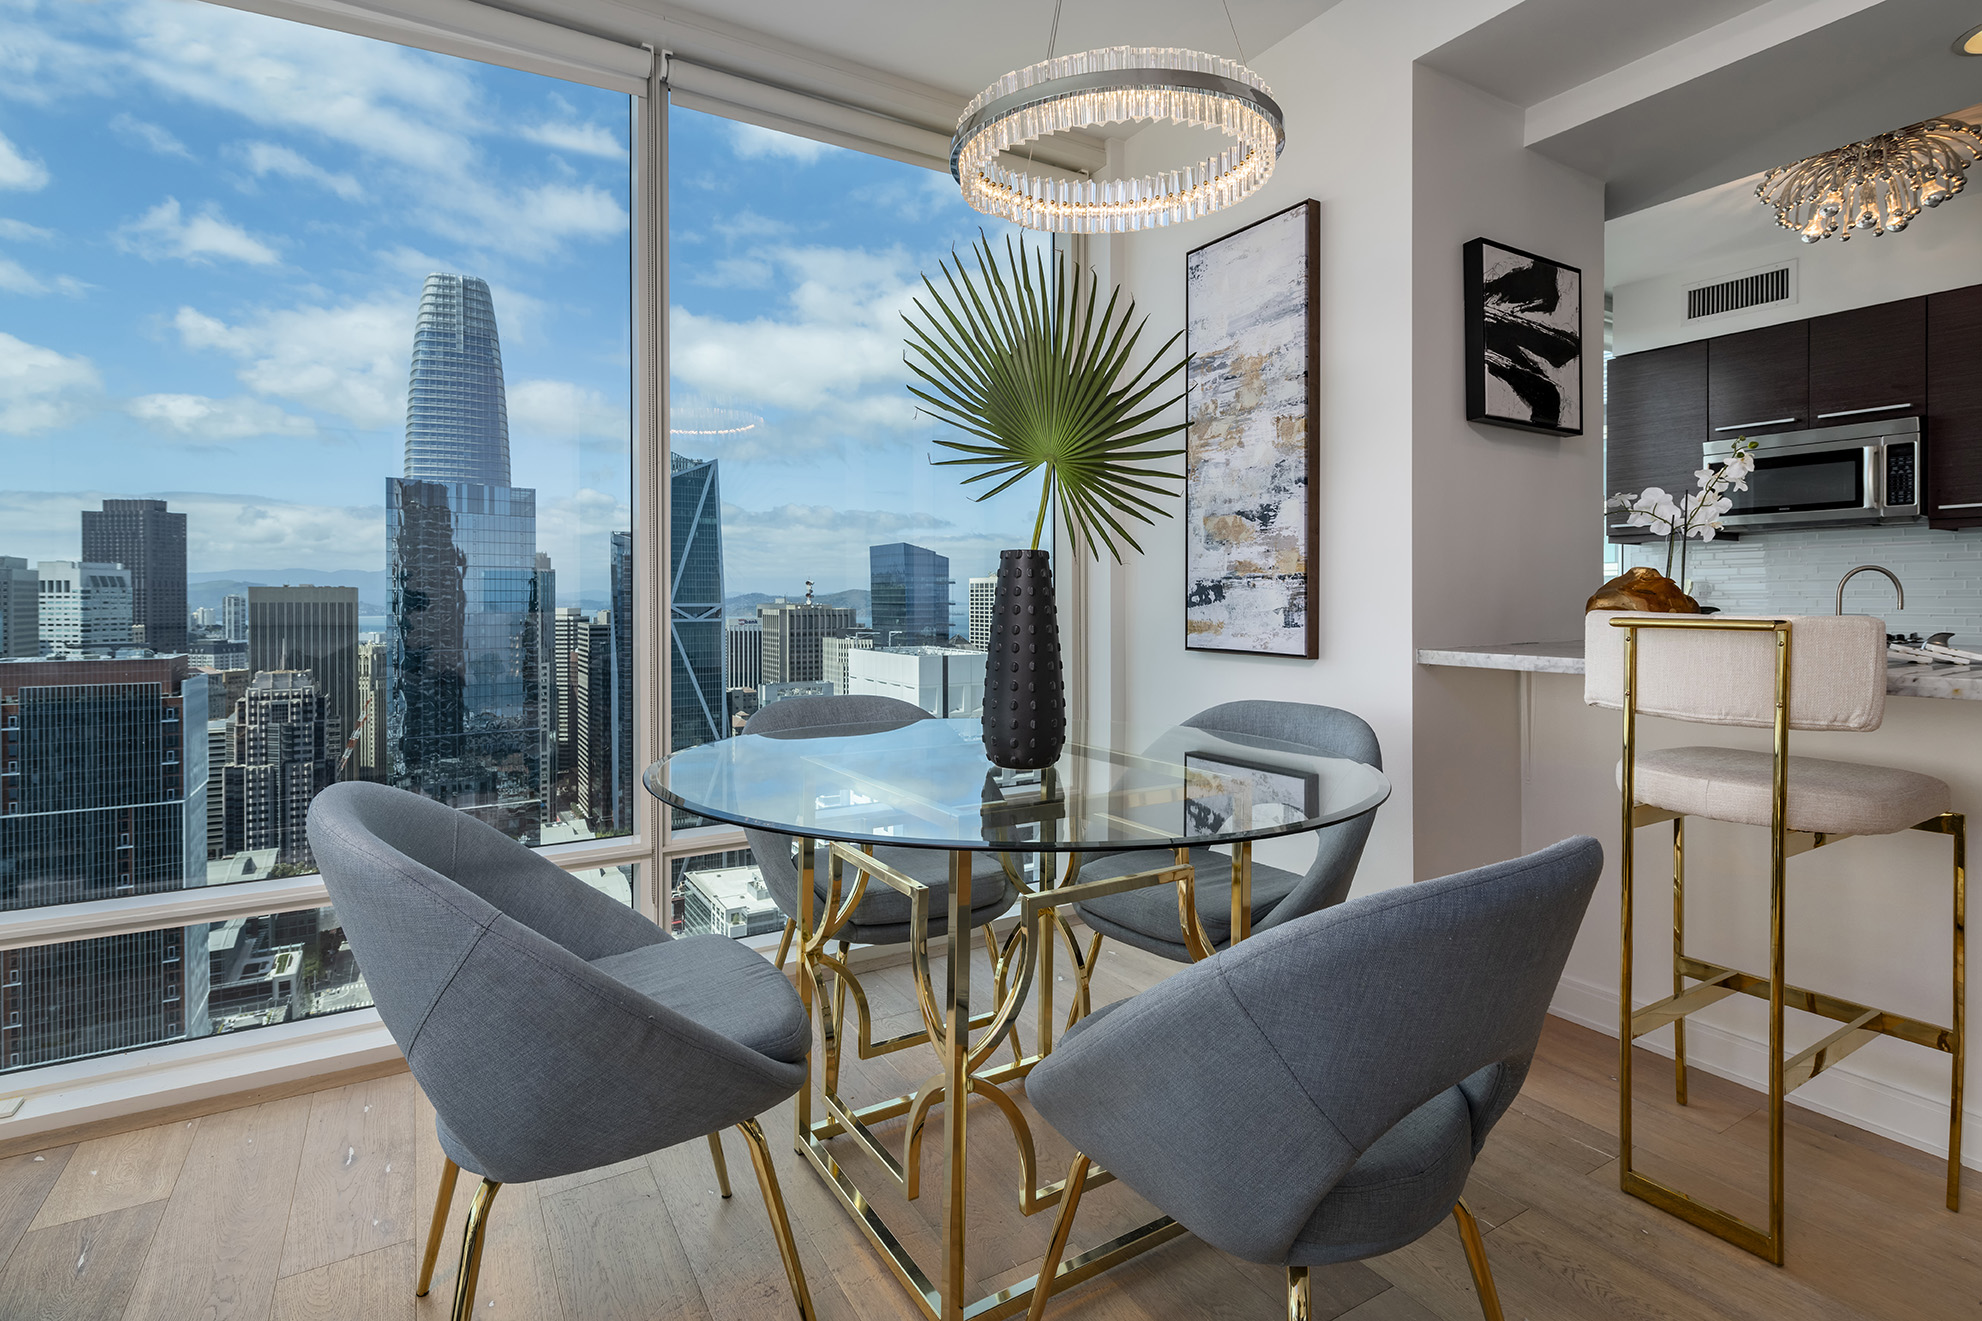 SF condo view of Salesforce tower